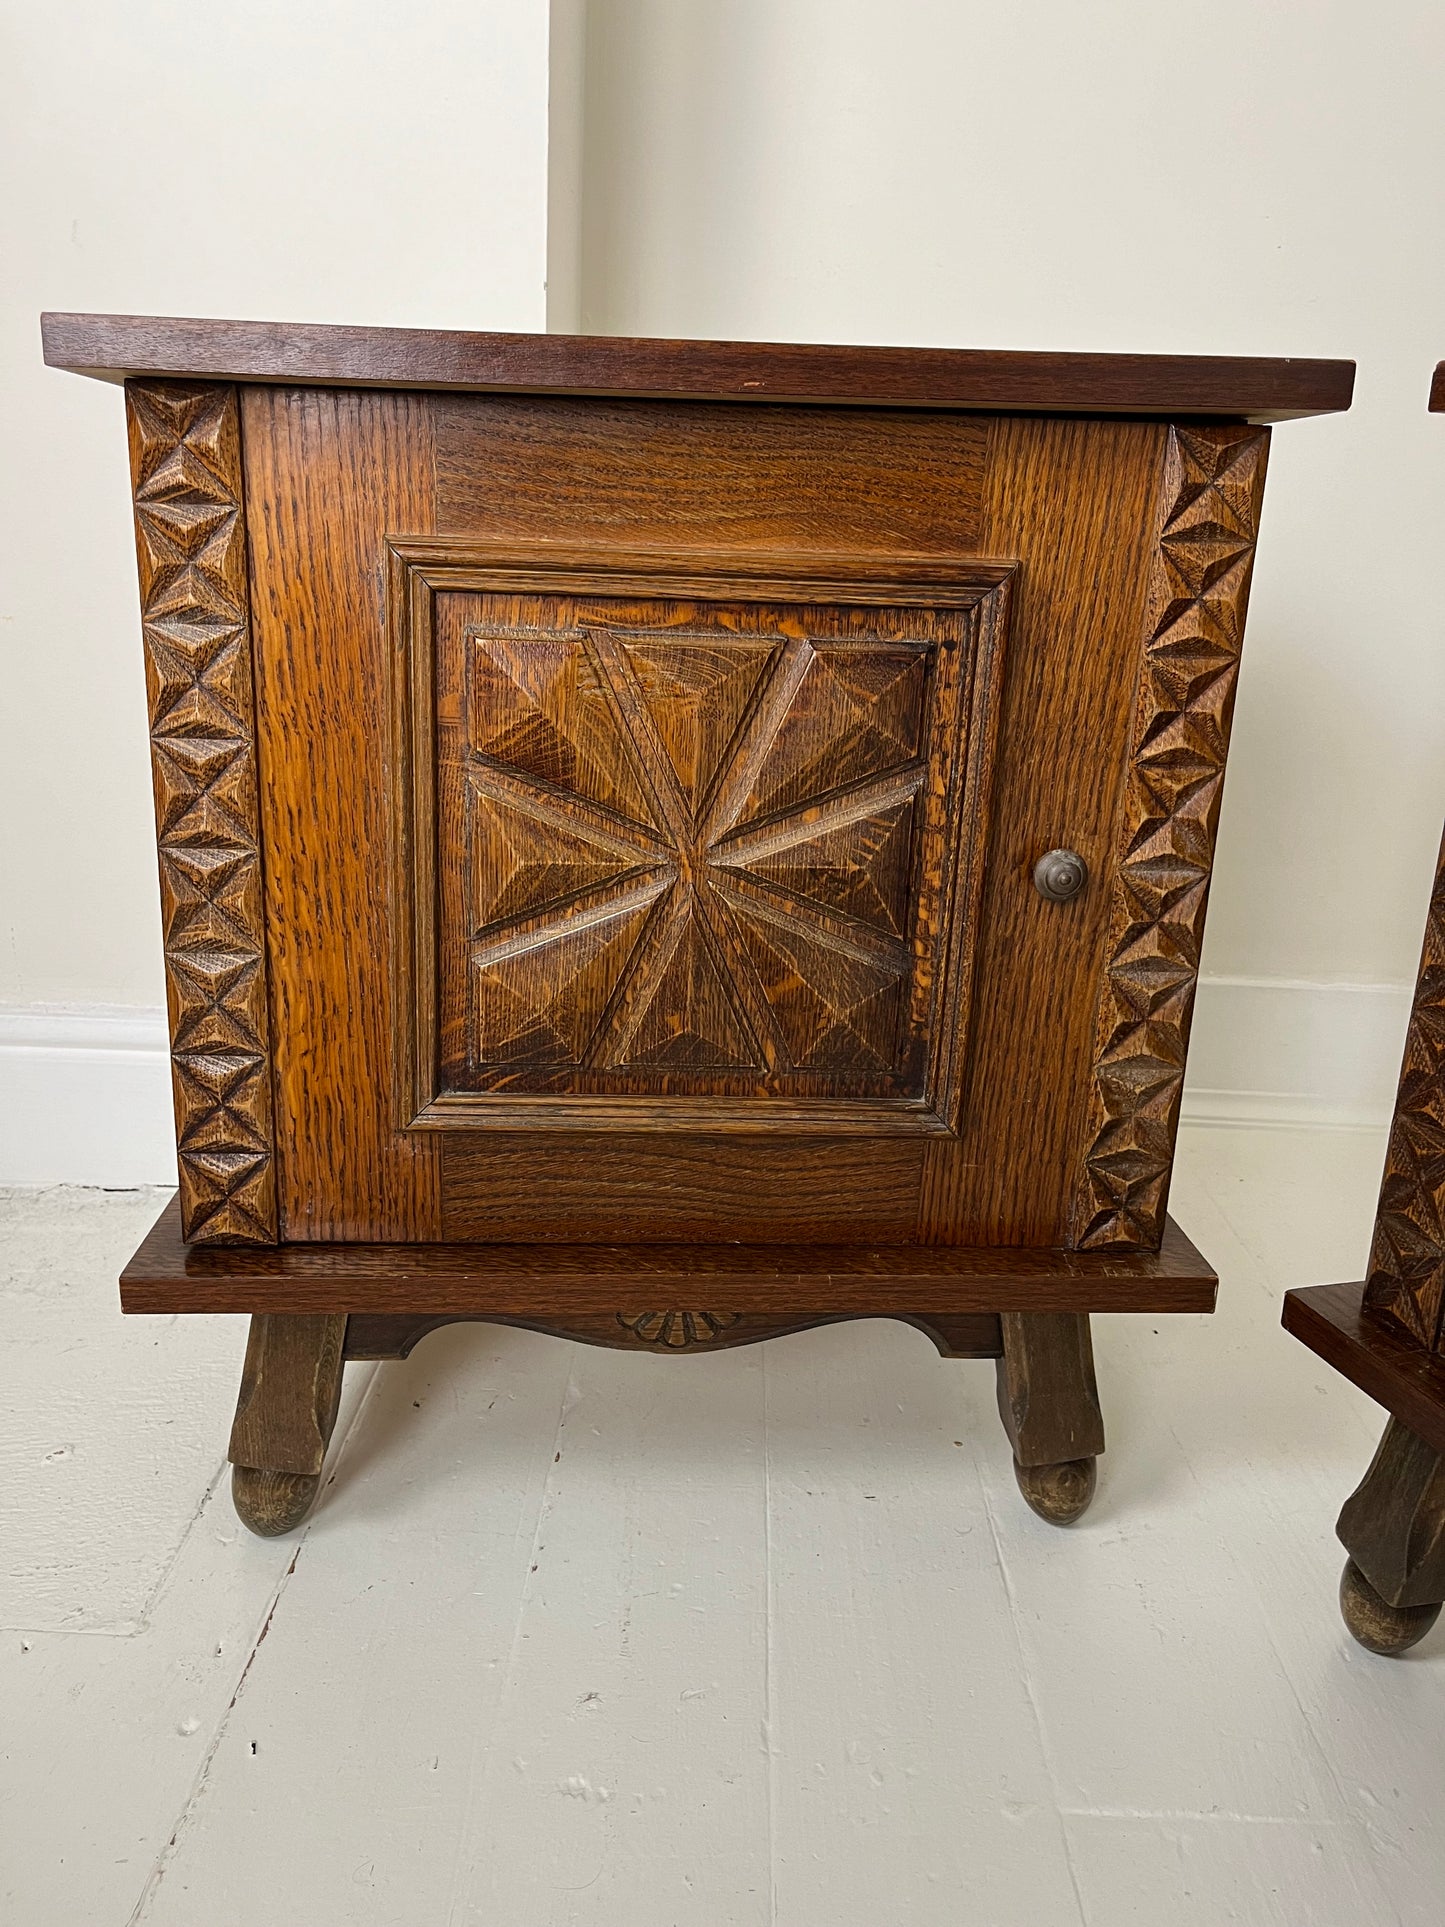 PAIR OF FRENCH BEDSIDE CABINETS